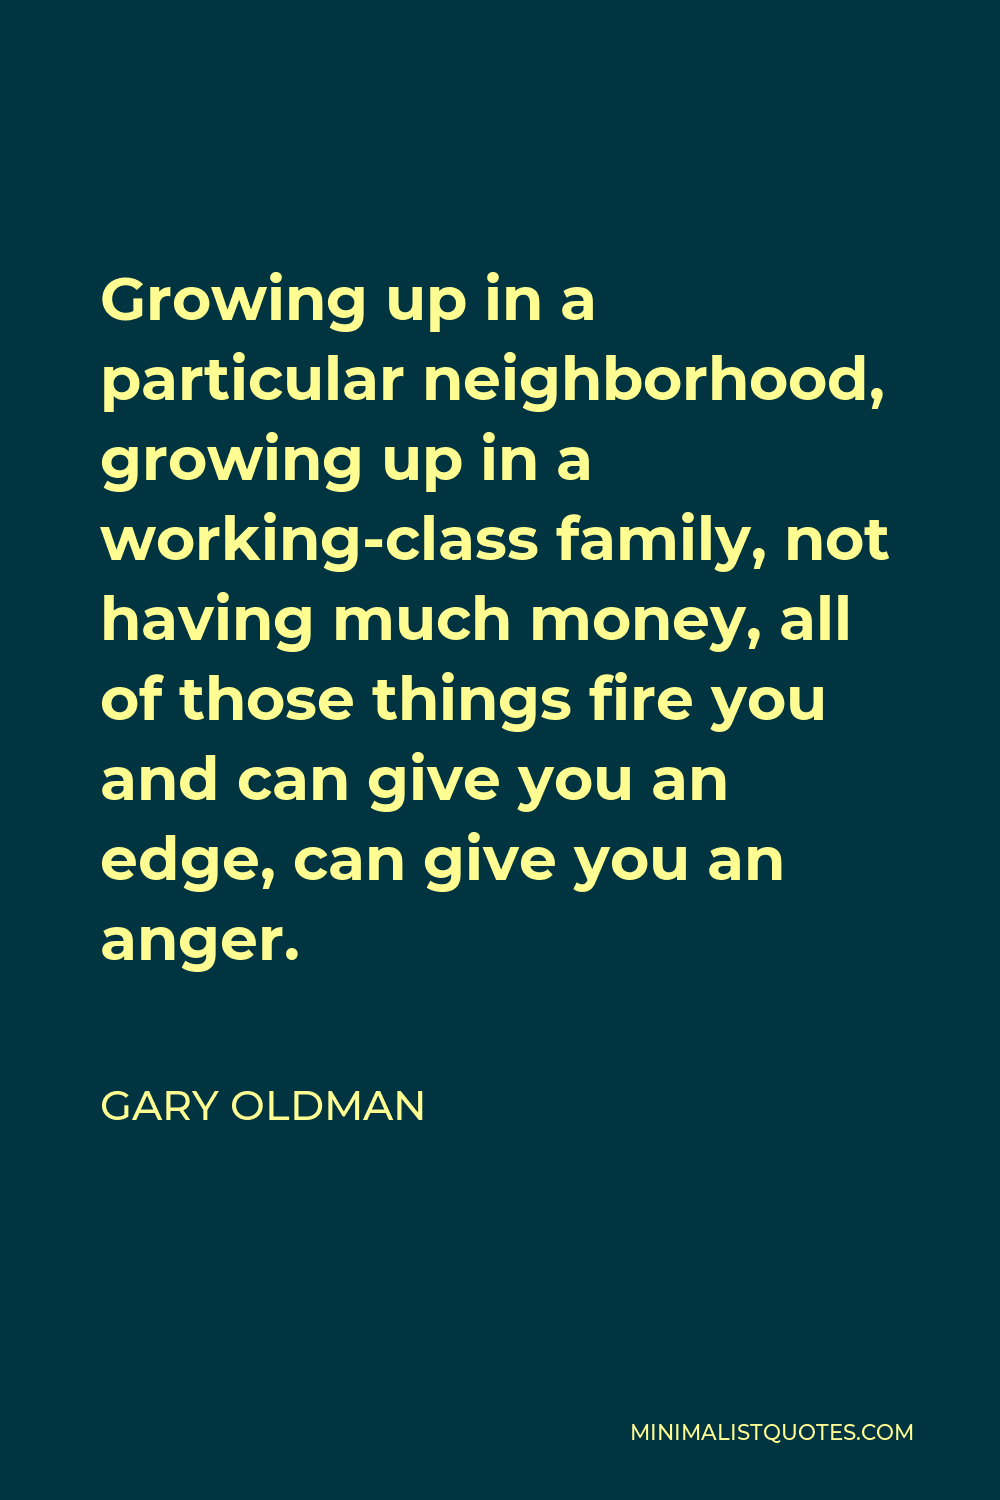 Gary Oldman Quote - Growing up in a particular neighborhood, growing up in a working-class family, not having much money, all of those things fire you and can give you an edge, can give you an anger.